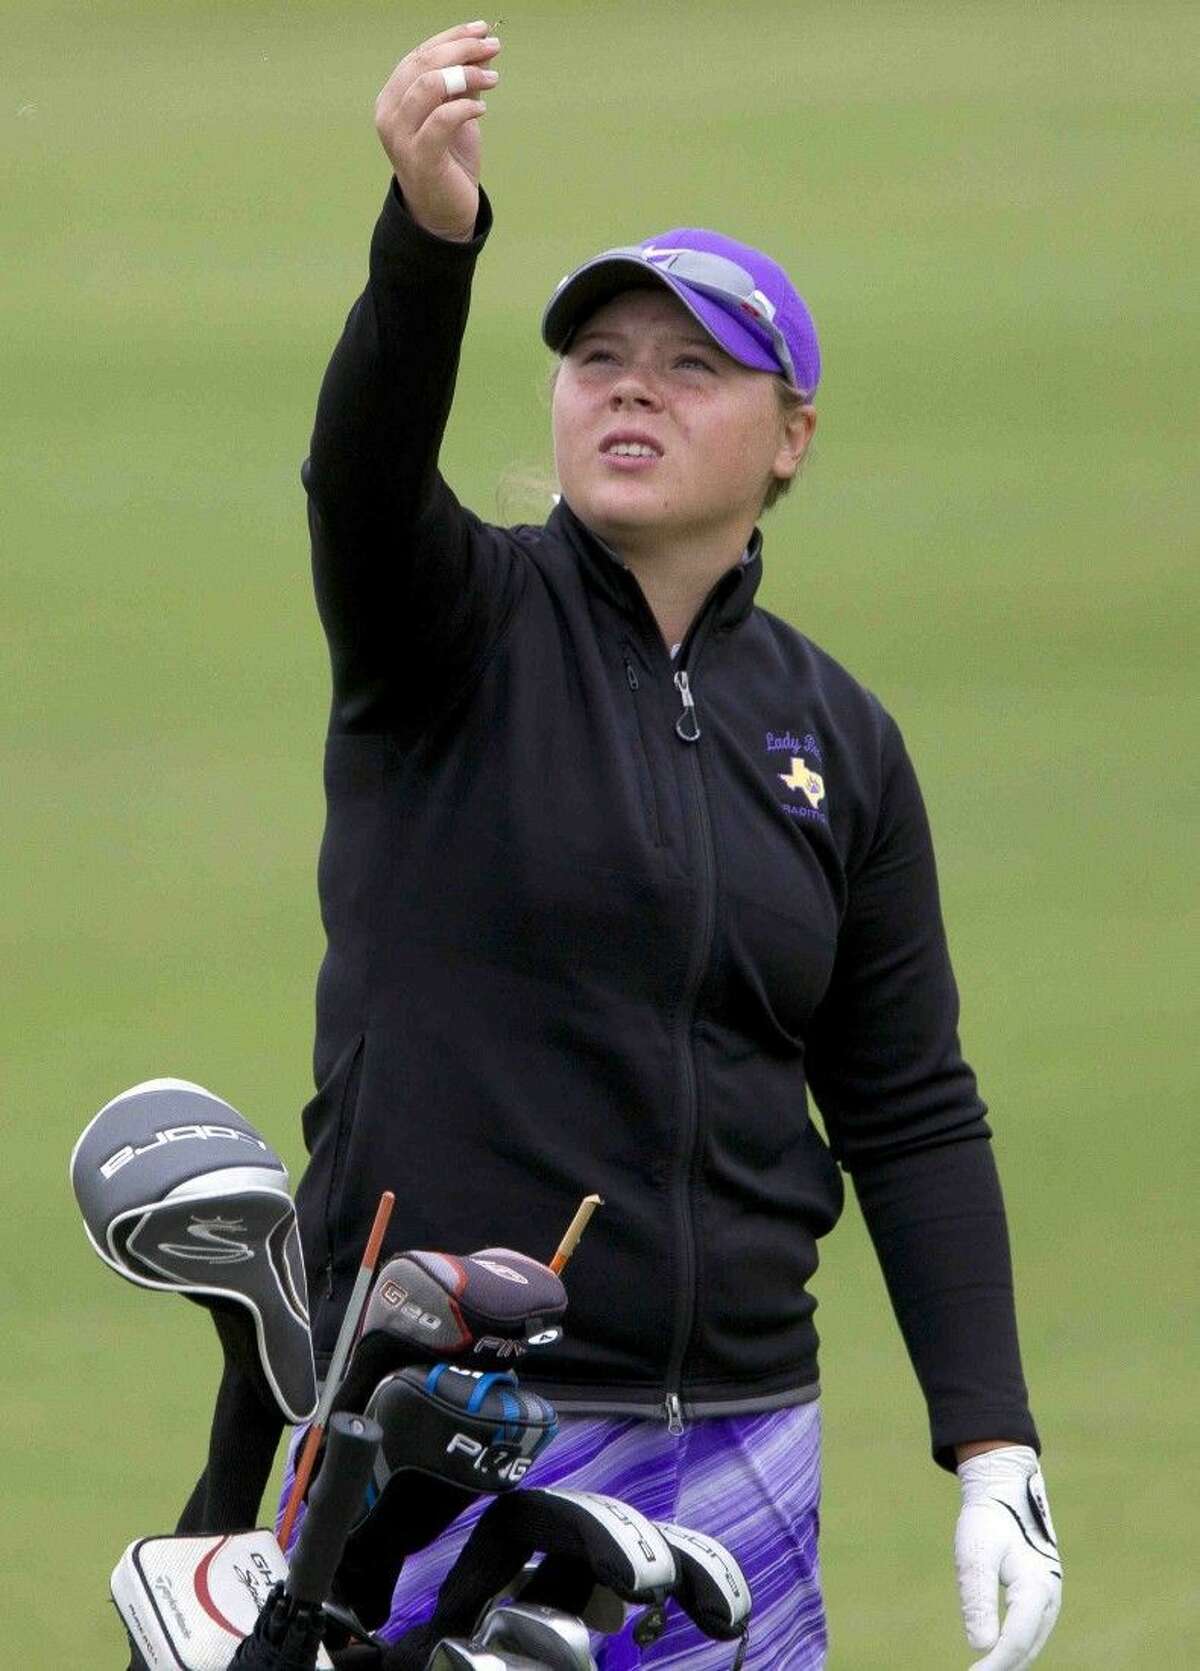 Montgomery graduate Autumn Bynum reached the 32-player match play bracket at the 95th Women's Texas Golf Association State Amateur Championship at Brook Hollow Golf Club in Dallas.